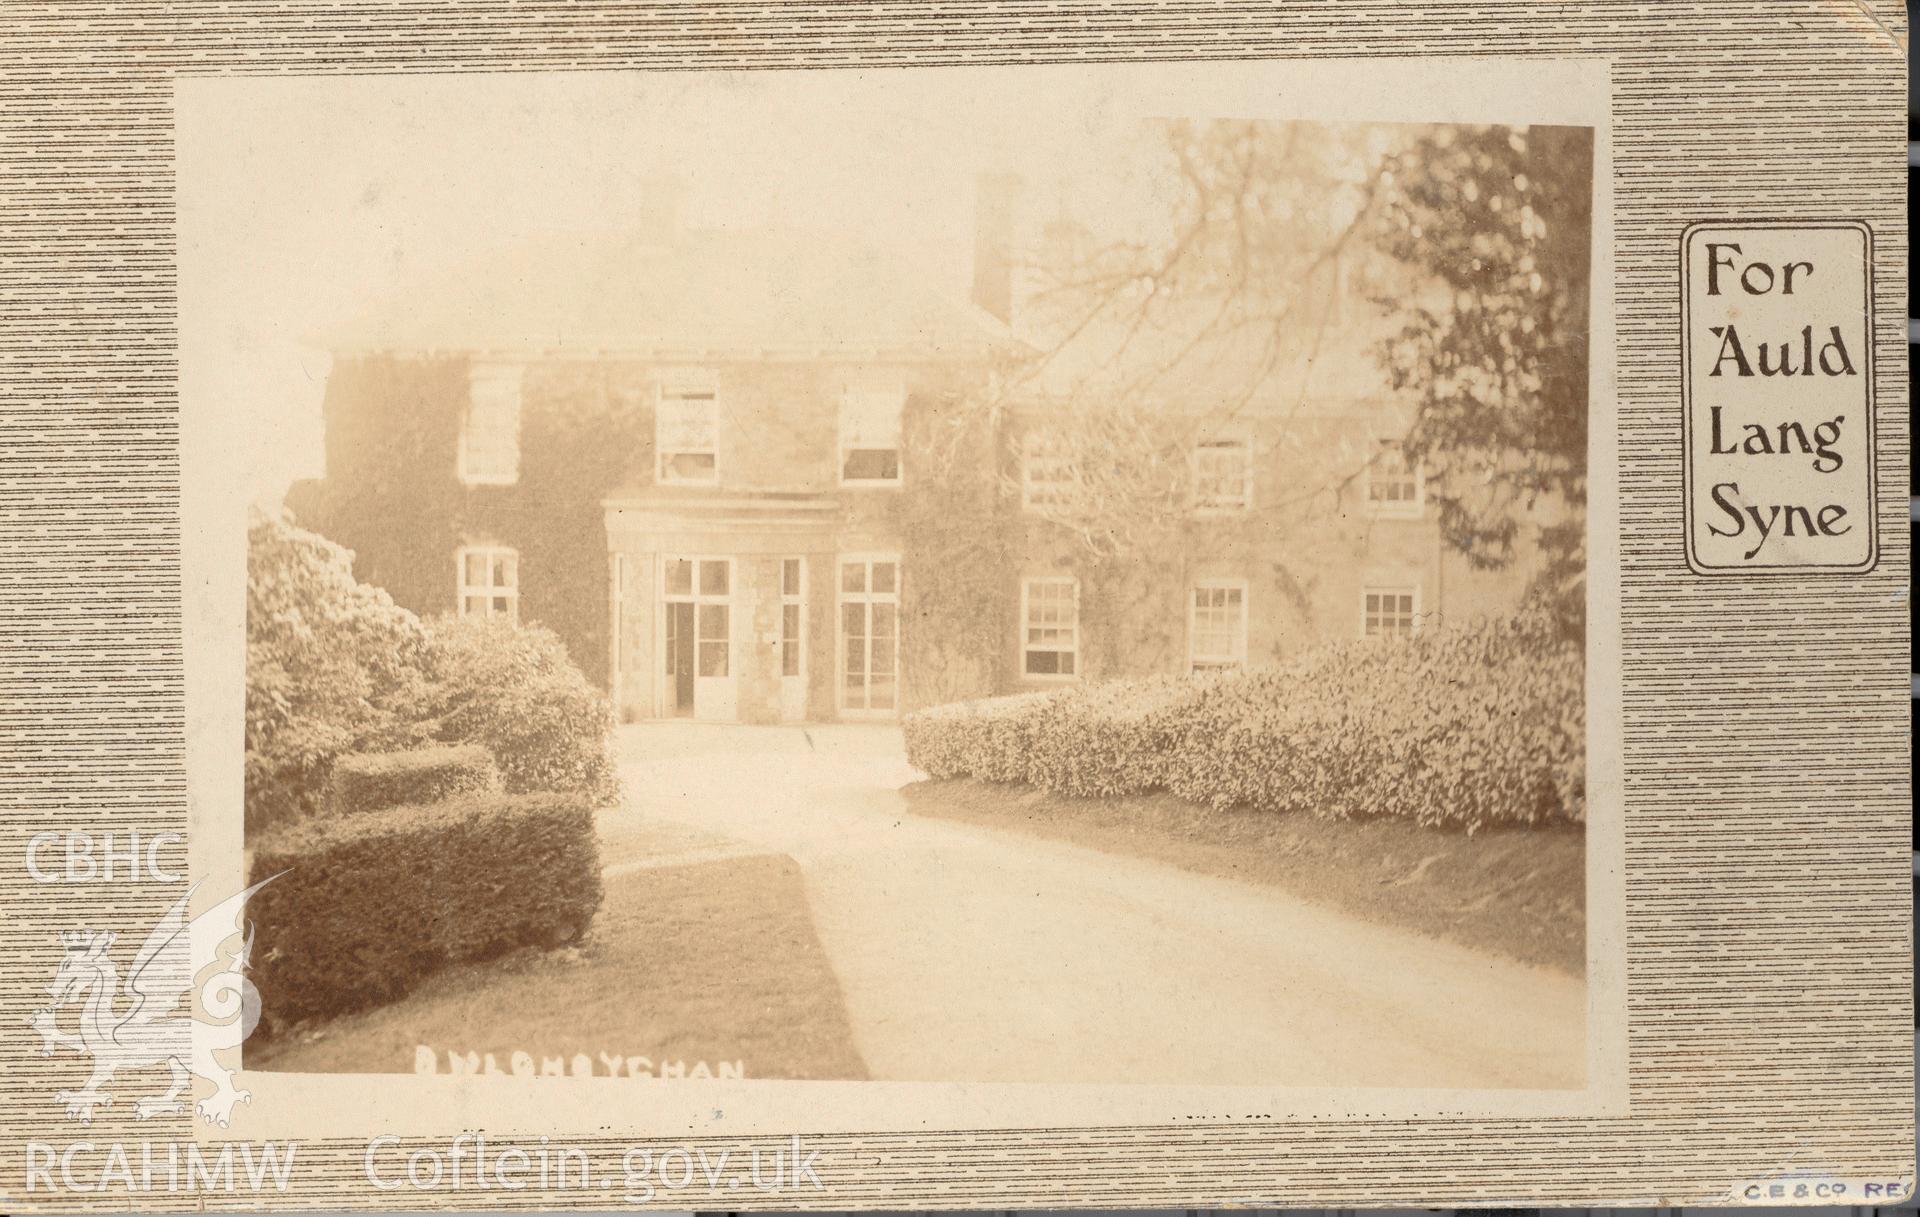 Digitised postcard image of Bwlchbychan House, C.E. & Co. Produced by Parks and Gardens Data Services, from an original item in the Peter Davis Collection at Parks and Gardens UK. We hold only web-resolution images of this collection, suitable for viewing on screen and for research purposes only. We do not hold the original images, or publication quality scans.